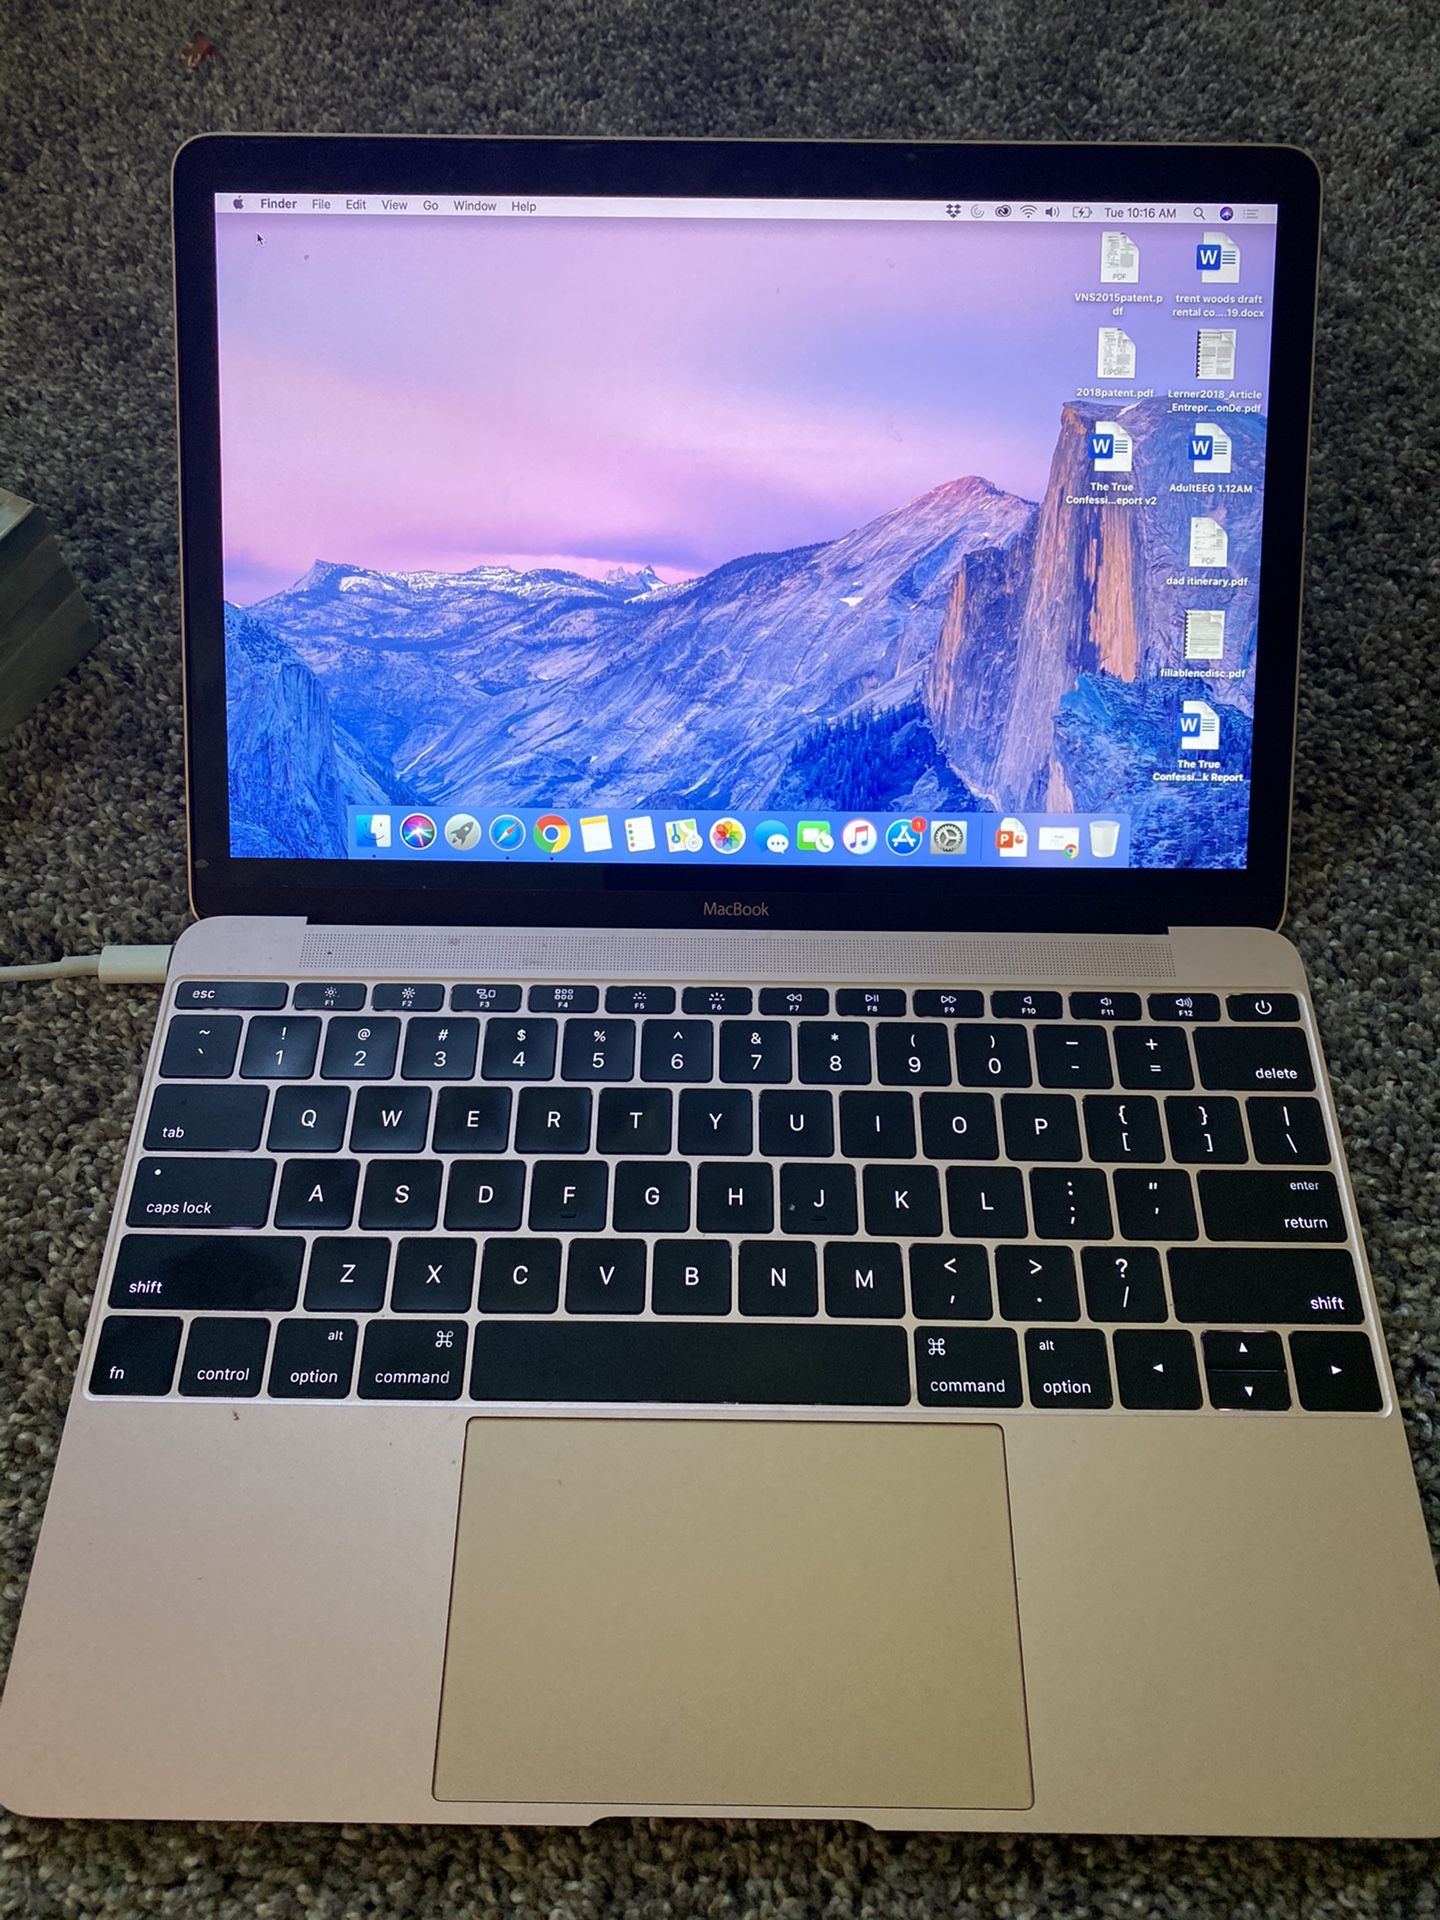 12" MacBook excellent condition barely used no flaws 2016 rose gold